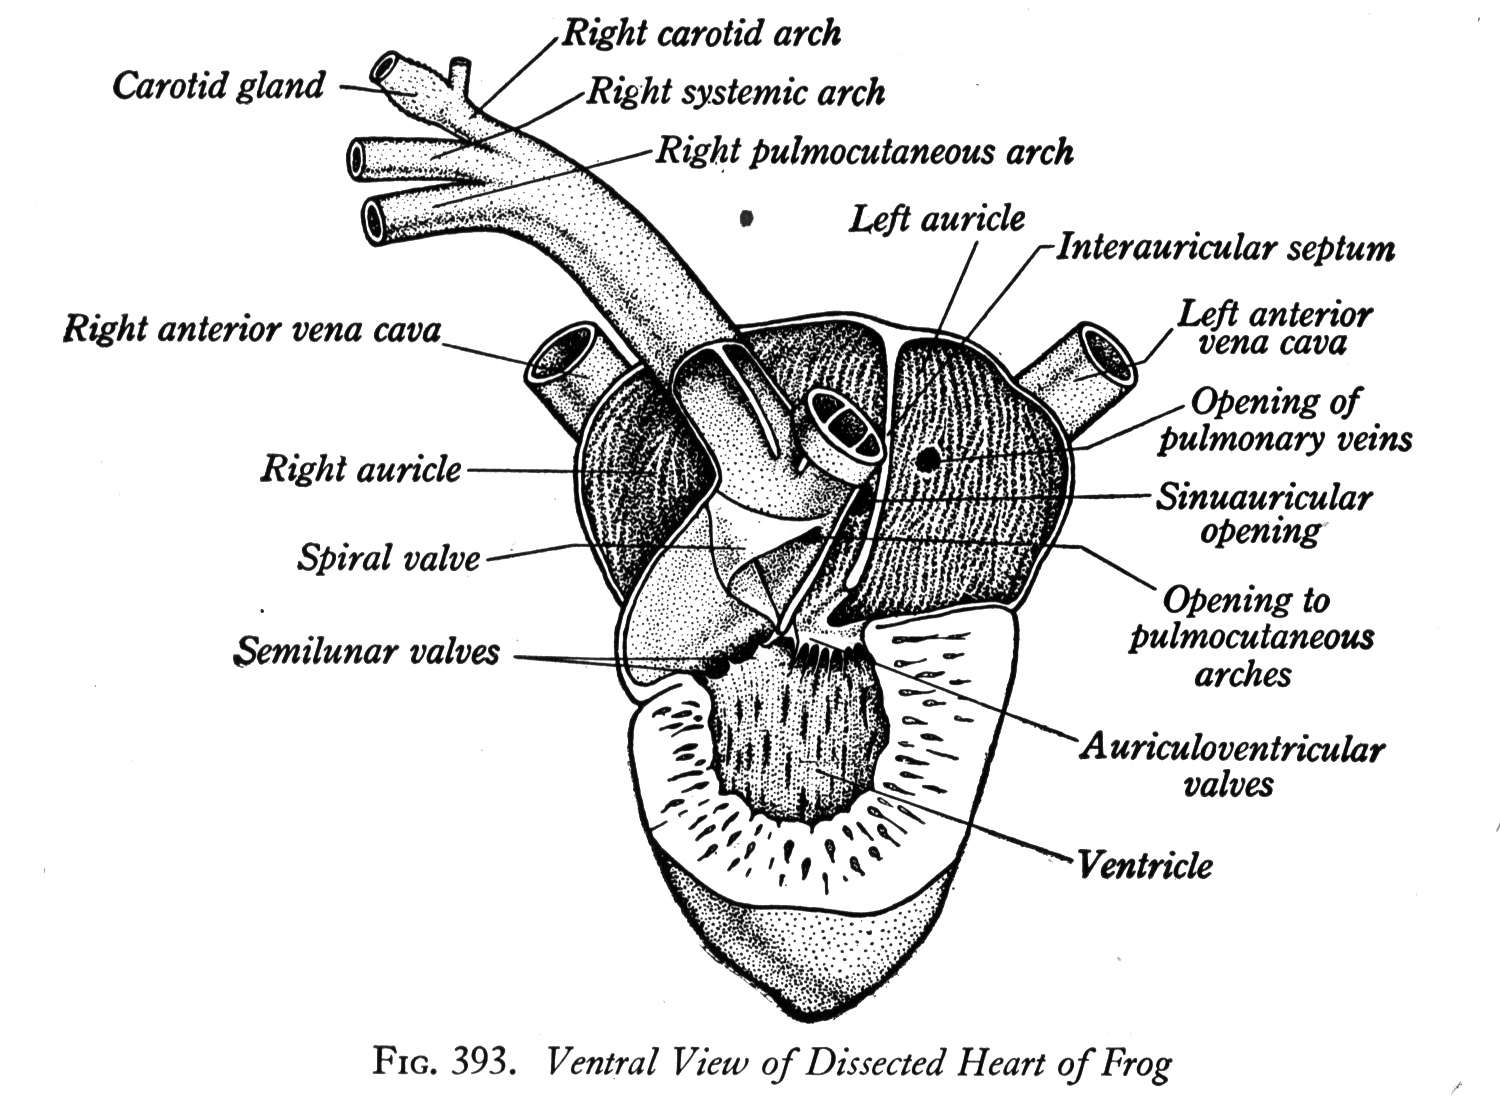 Standard Note: Structure and working of Frog's heart